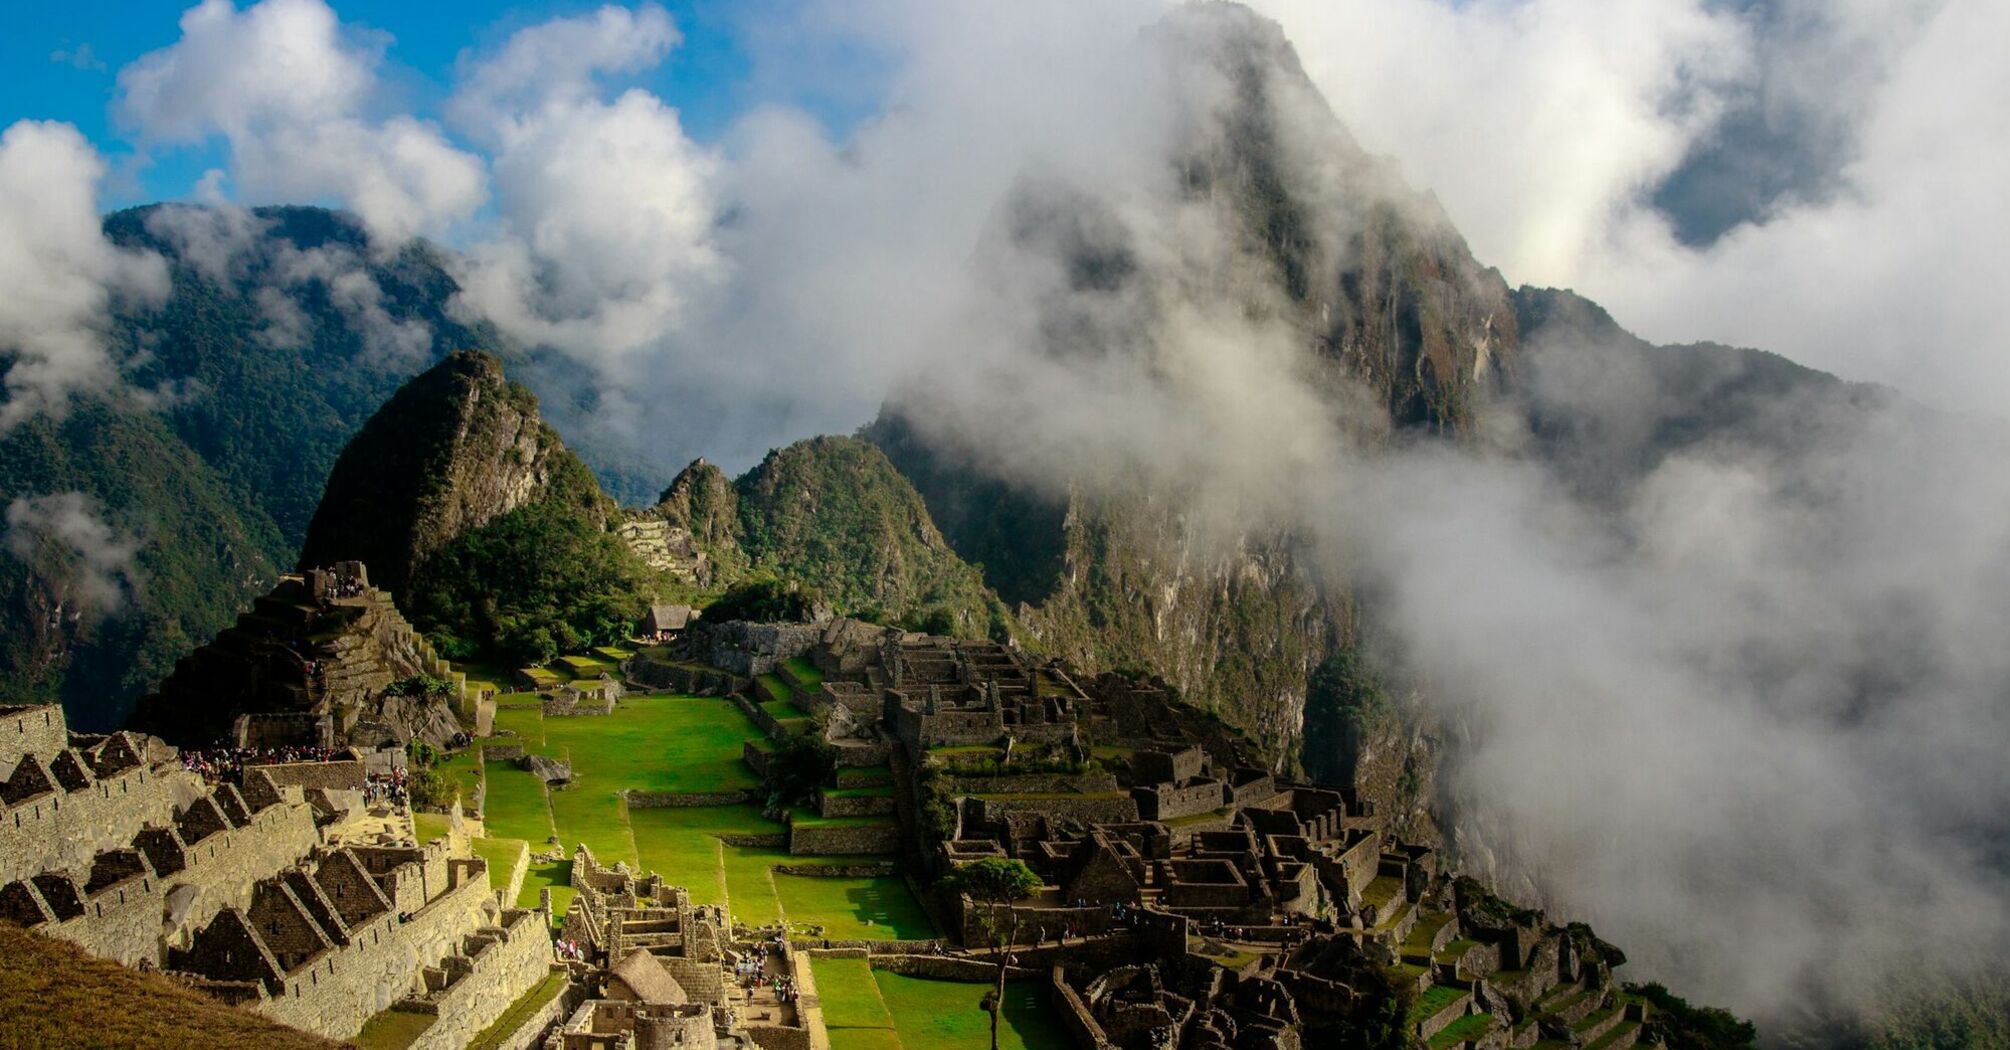 Aerial view of Machu Picchu with surrounding mountains and clouds